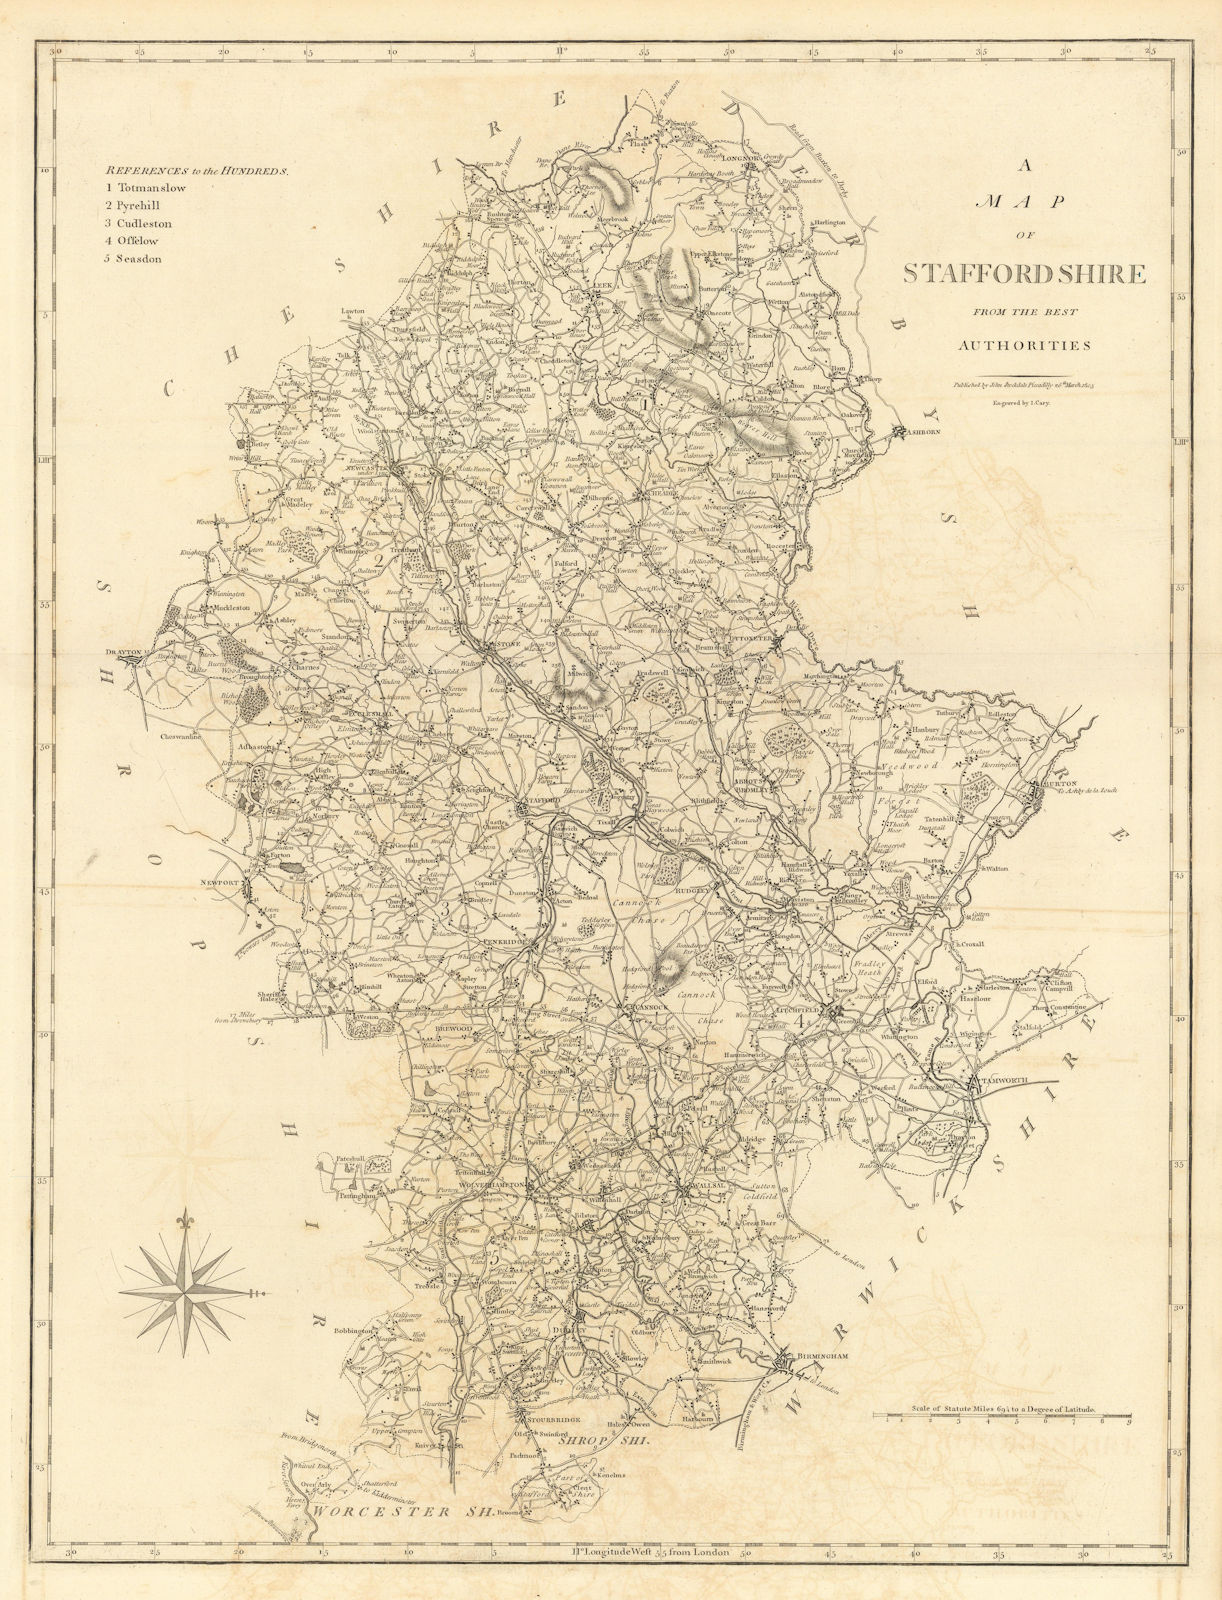 Associate Product "A map of Staffordshire from the best authorities". County map. CARY 1806